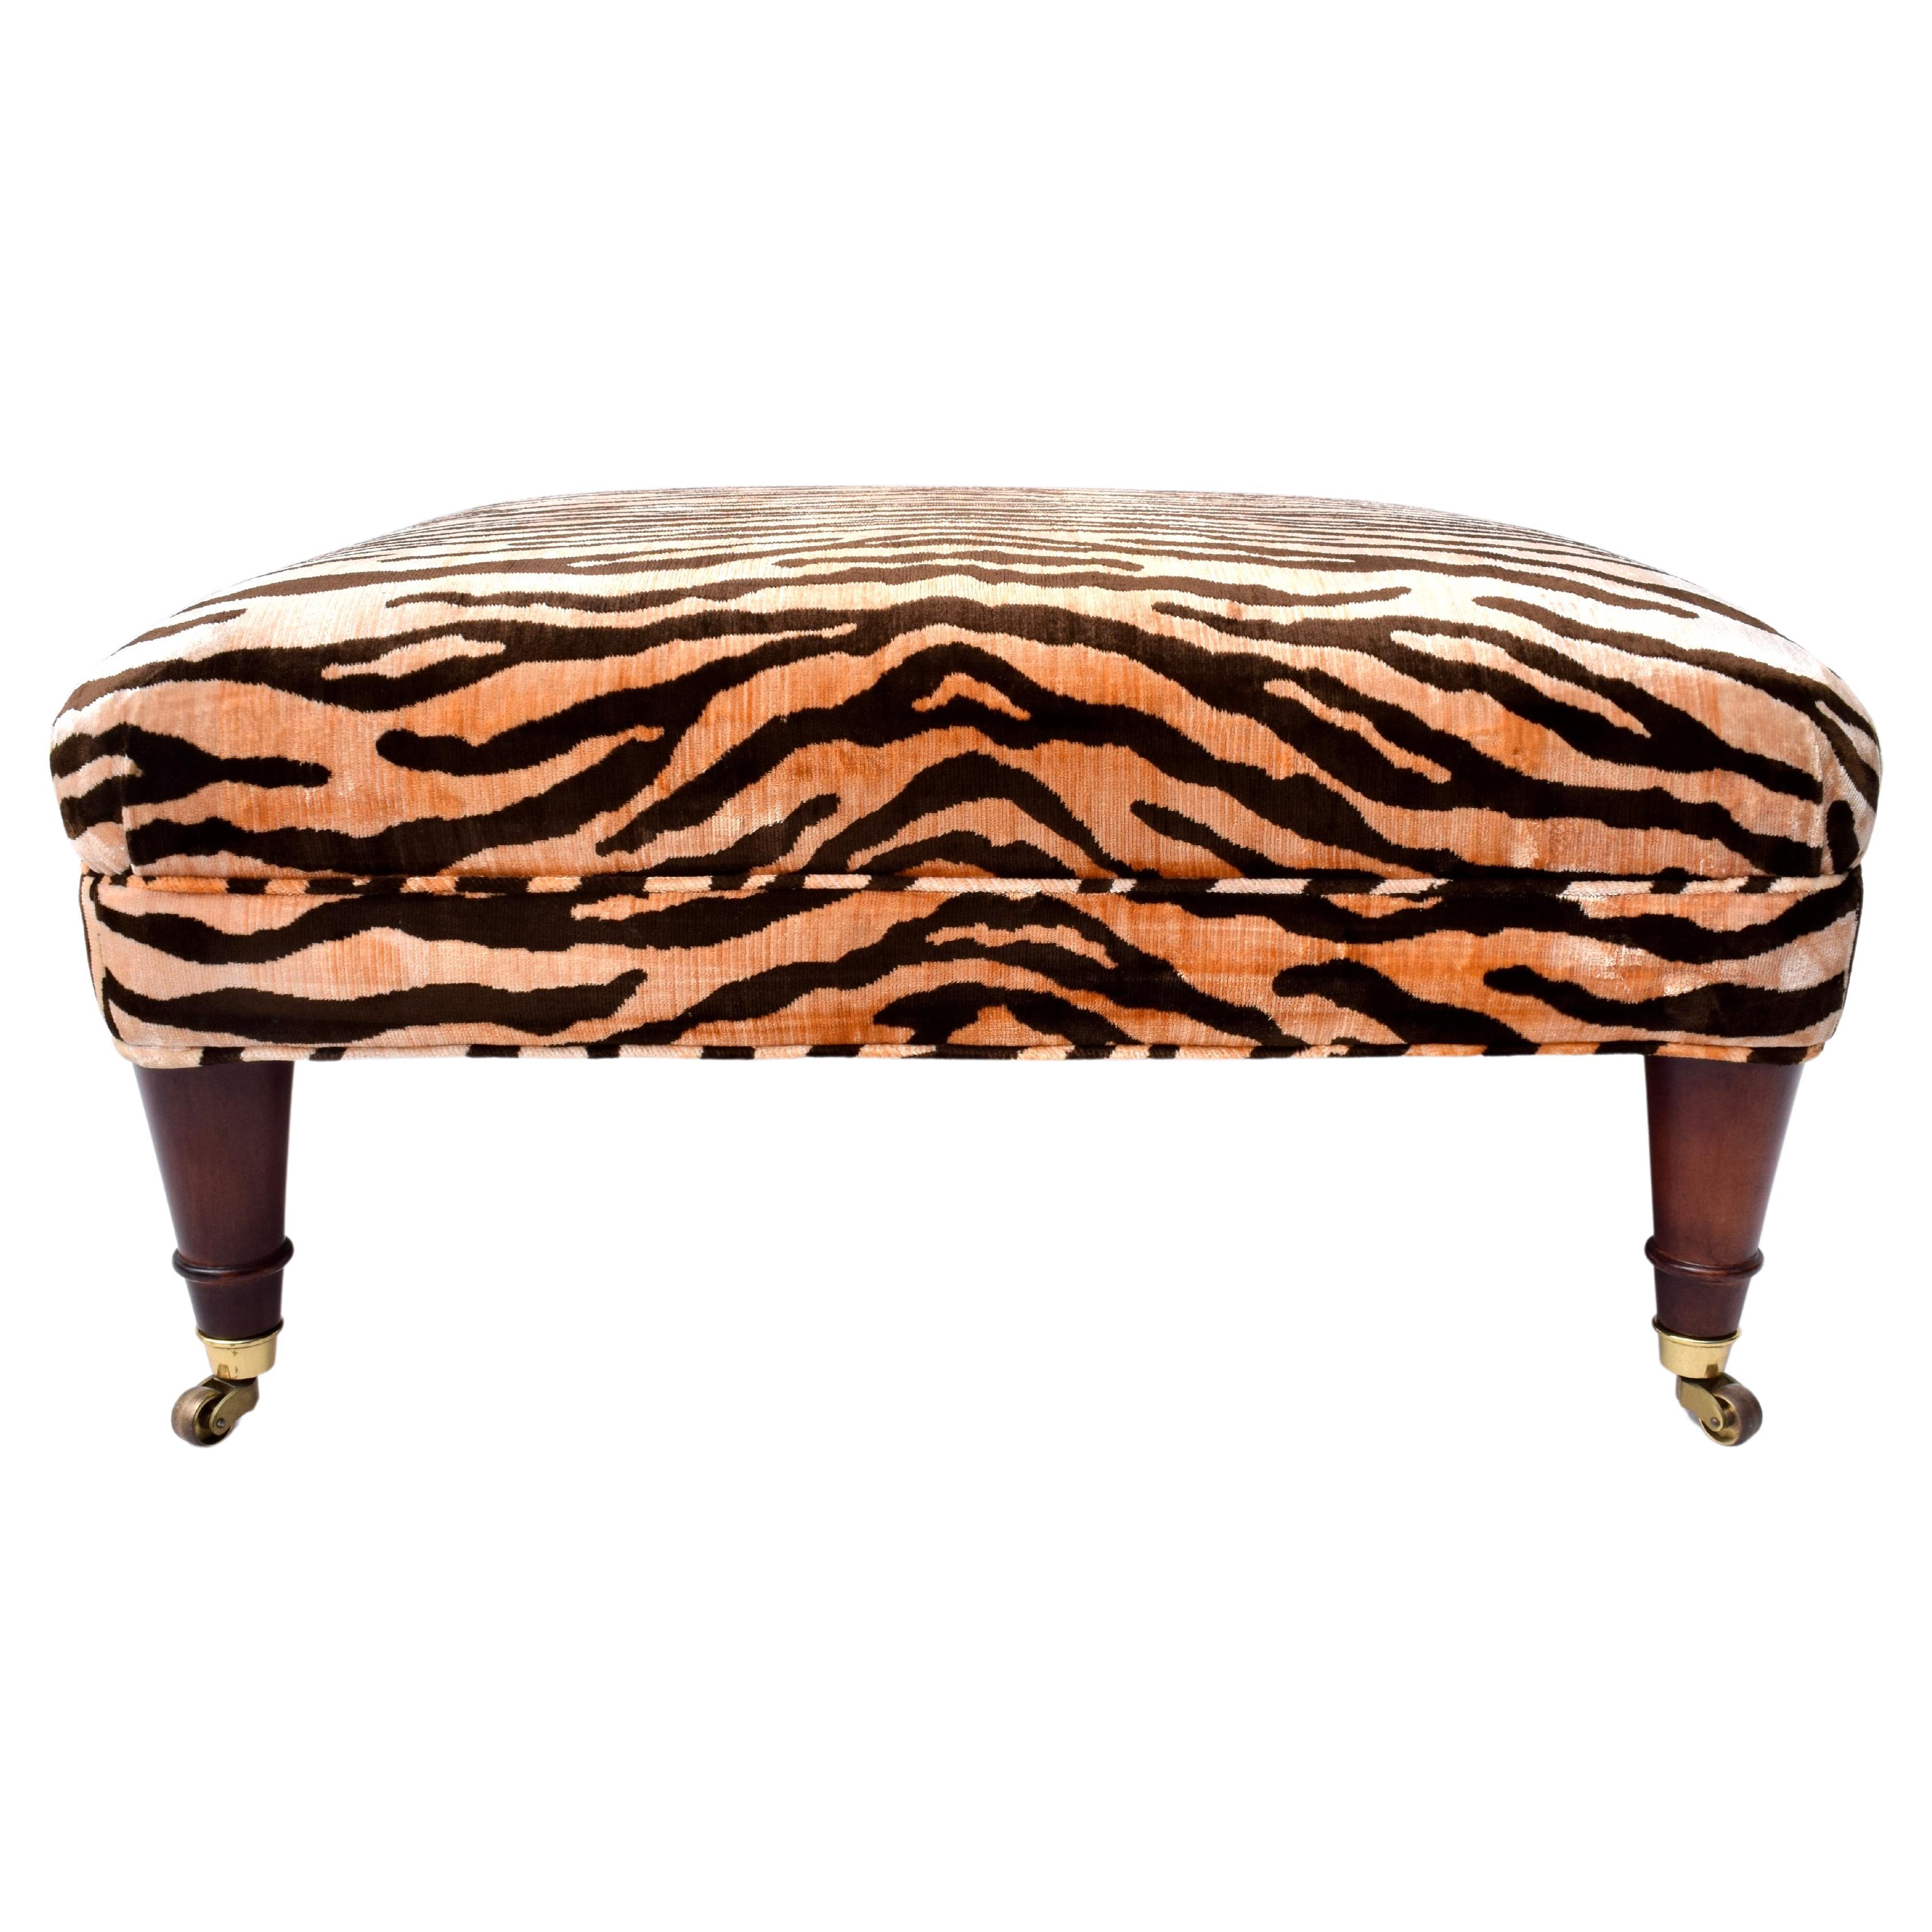 Mid century ottoman in Tigre velvet with turned Mahogany legs on brass casters by Jack Lenore Larsen Inc. Larsen Furniture; founded 1952.  Scarcely seen 20th c. furniture in beautifully maintained all original condition.